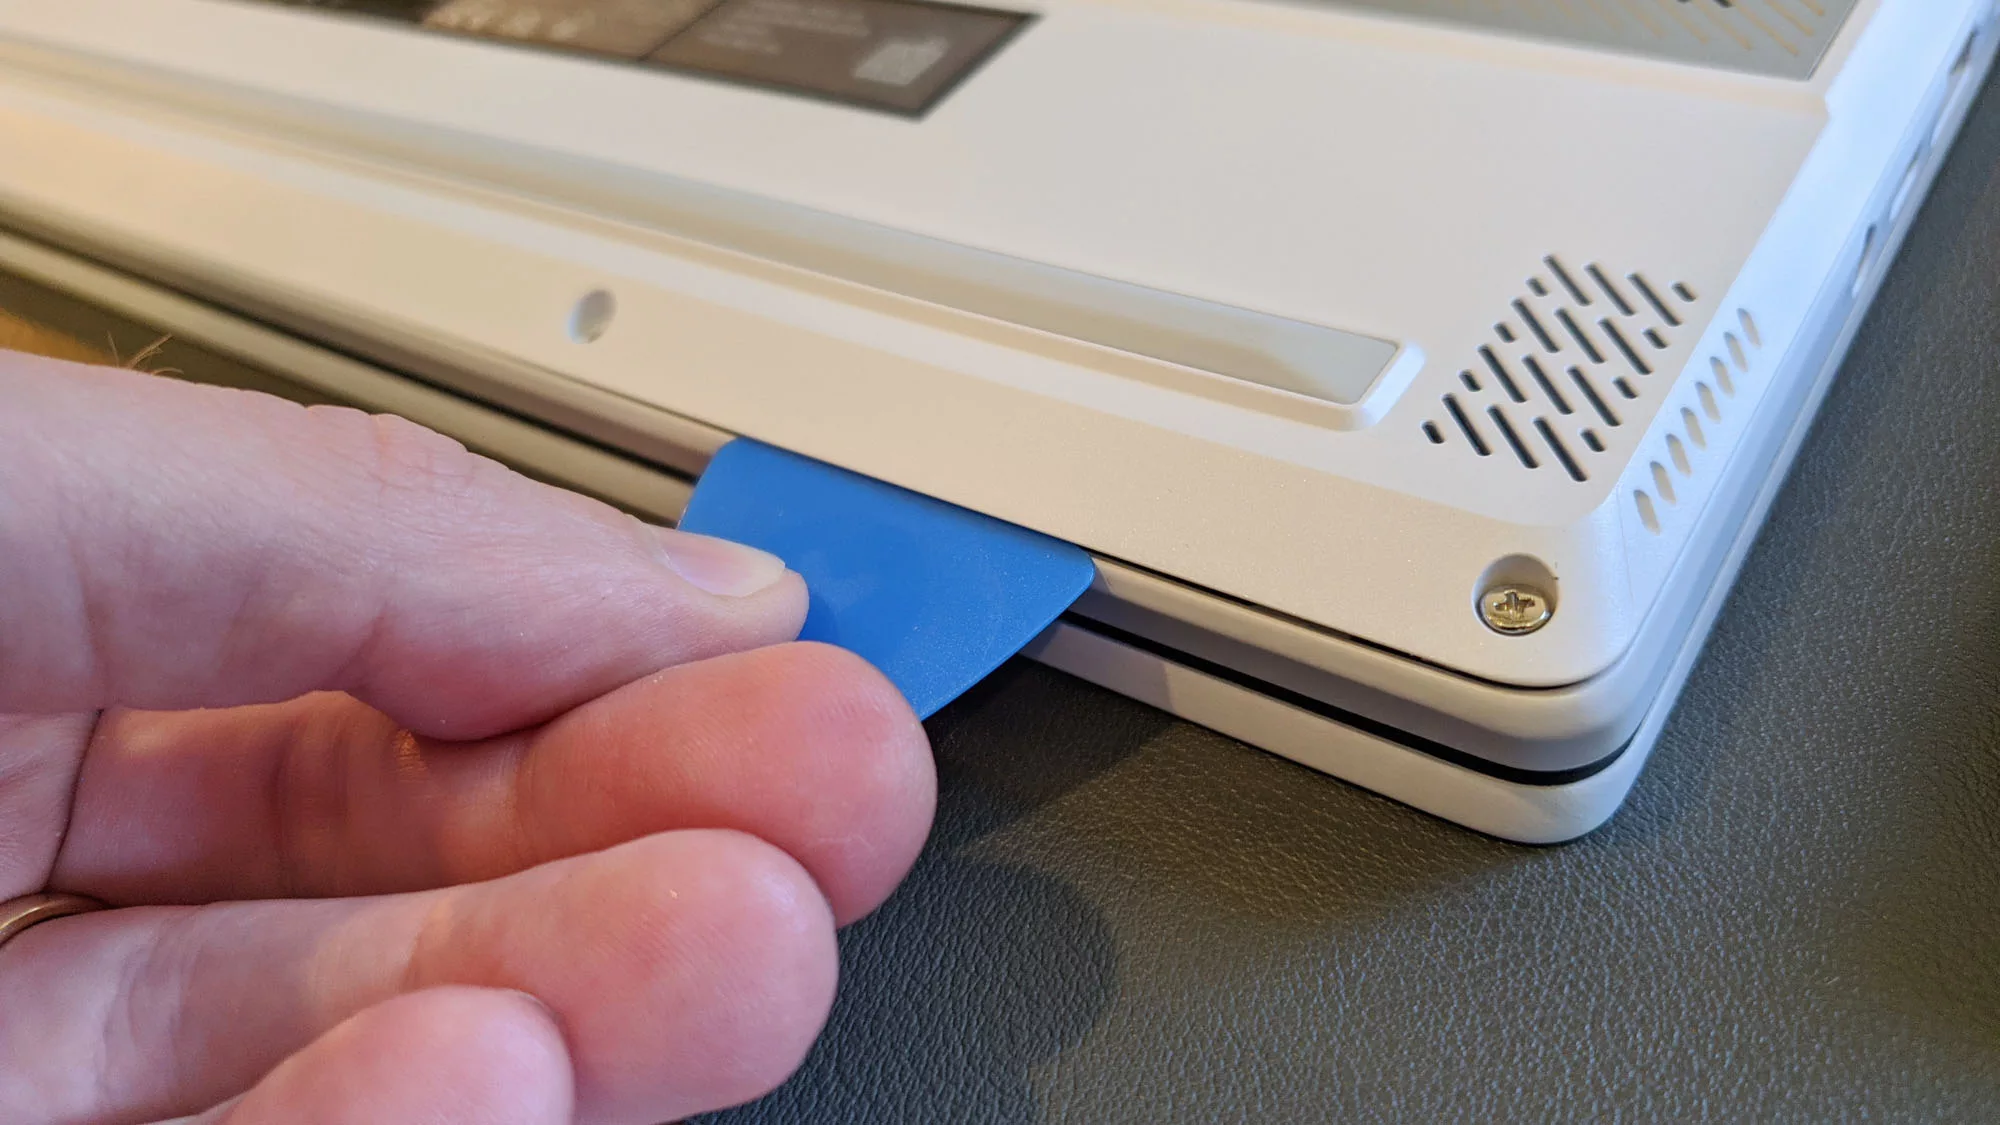 A photo of a hand inserting a guitar pick in between the panels of the Zephyrus G14 laptop.